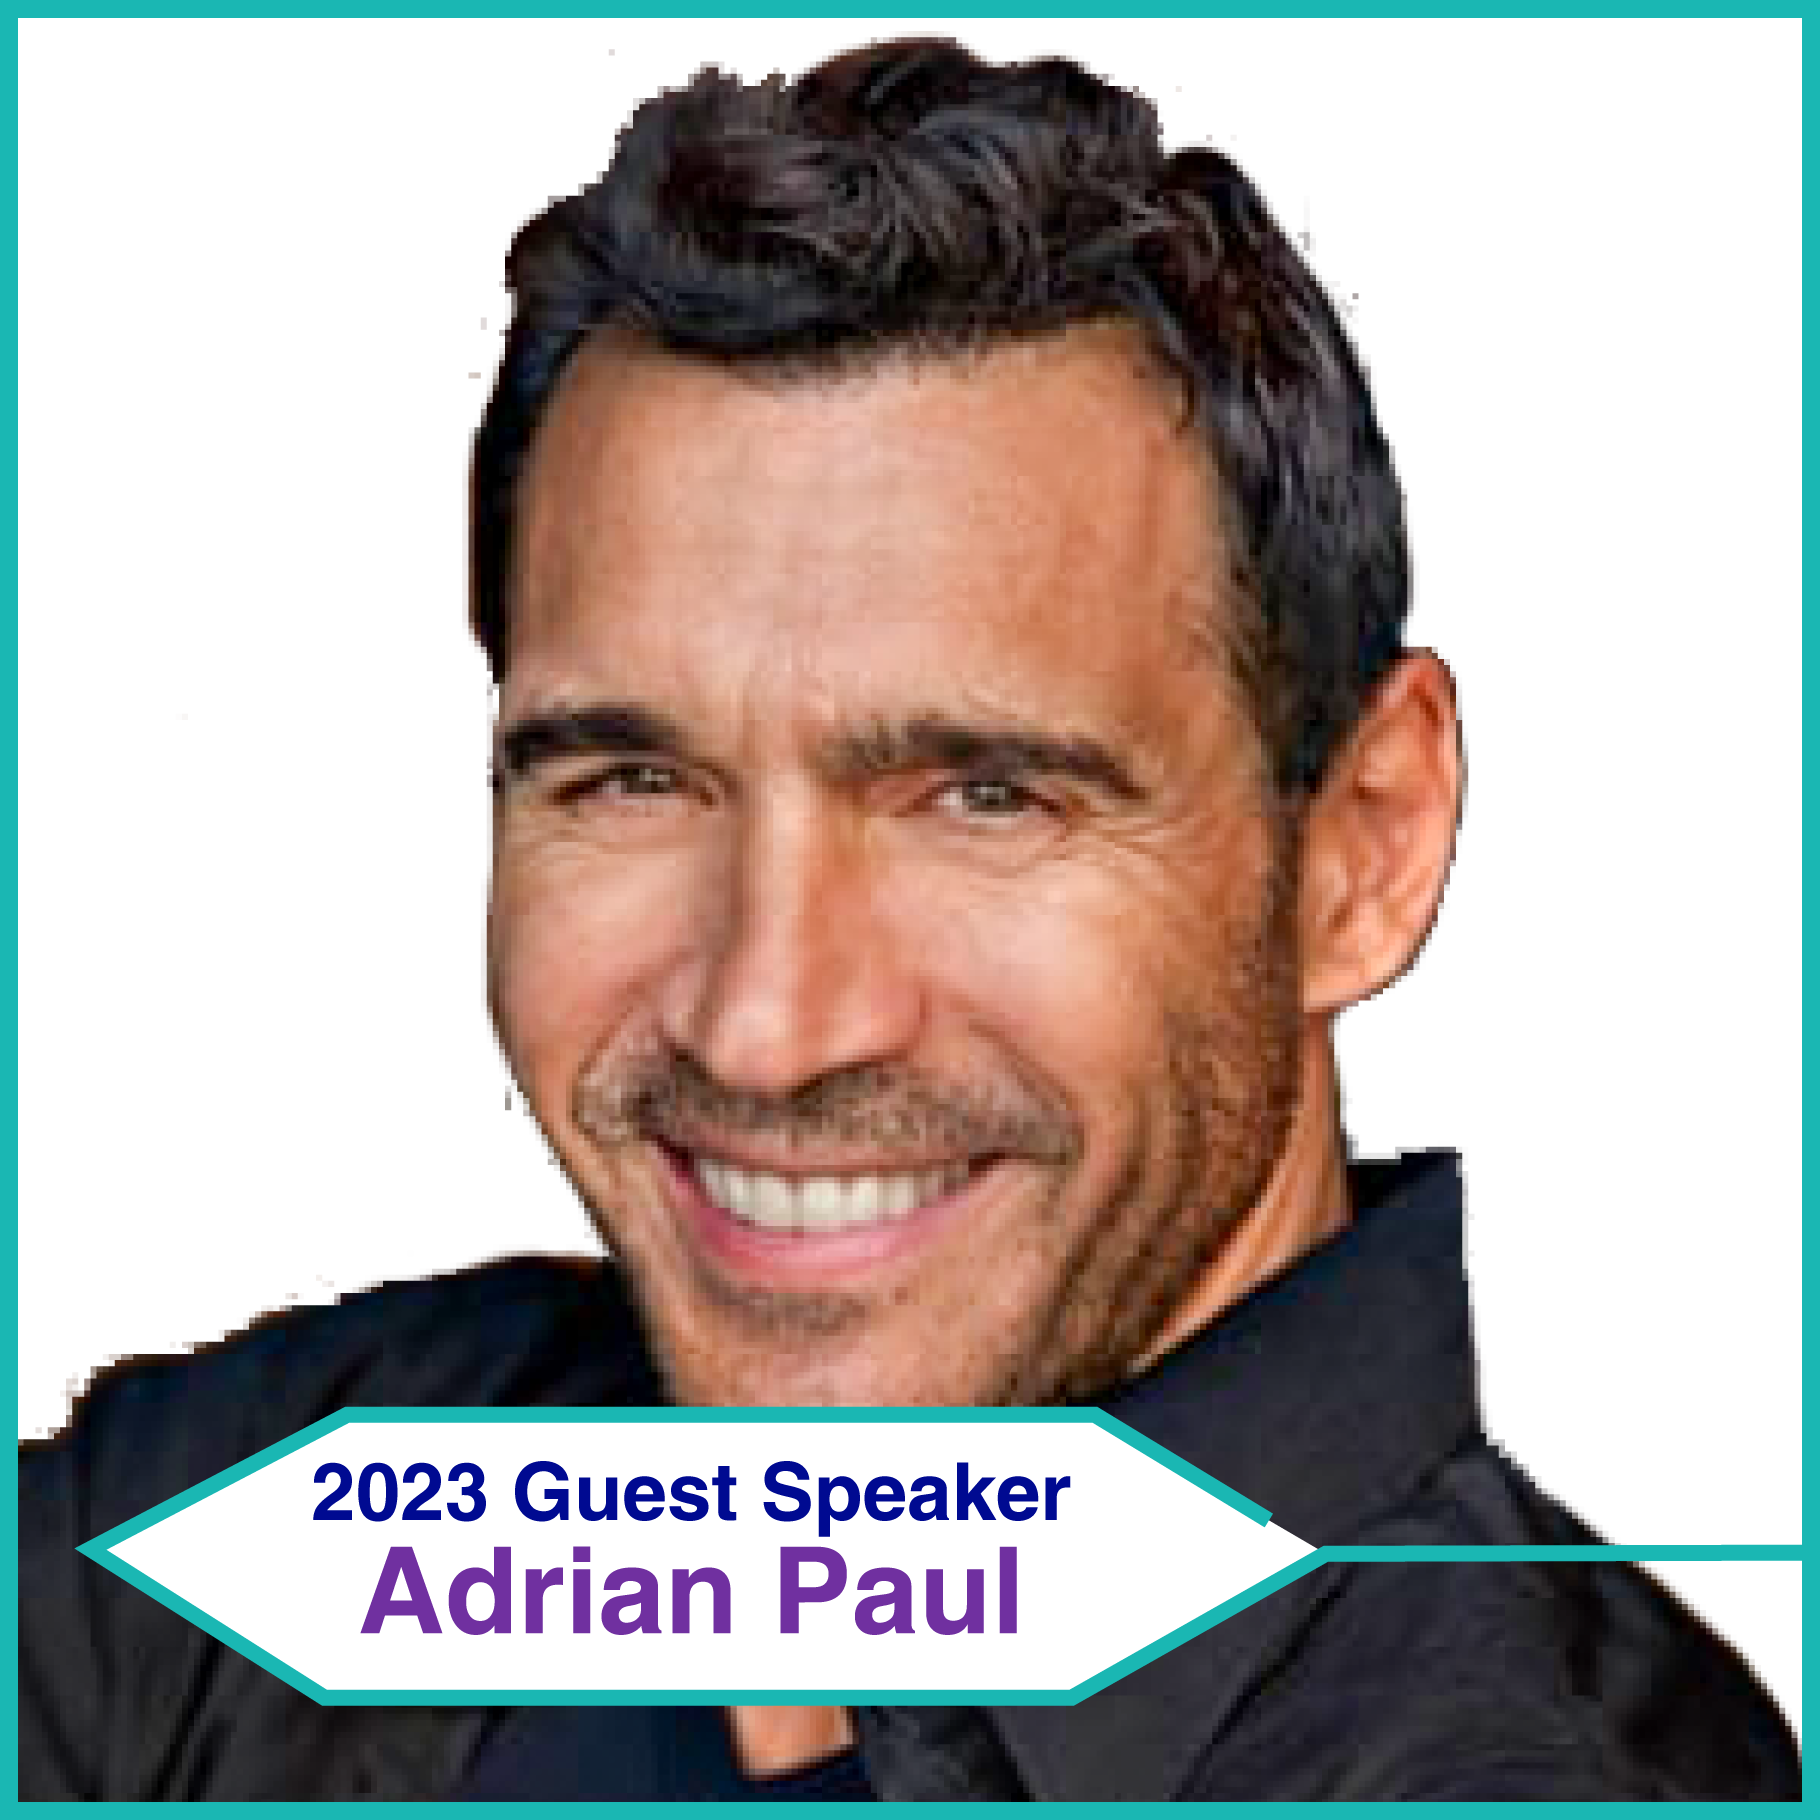 https://digifesttemecula.org/wp-content/uploads/2023/02/Adrian_Paul.png